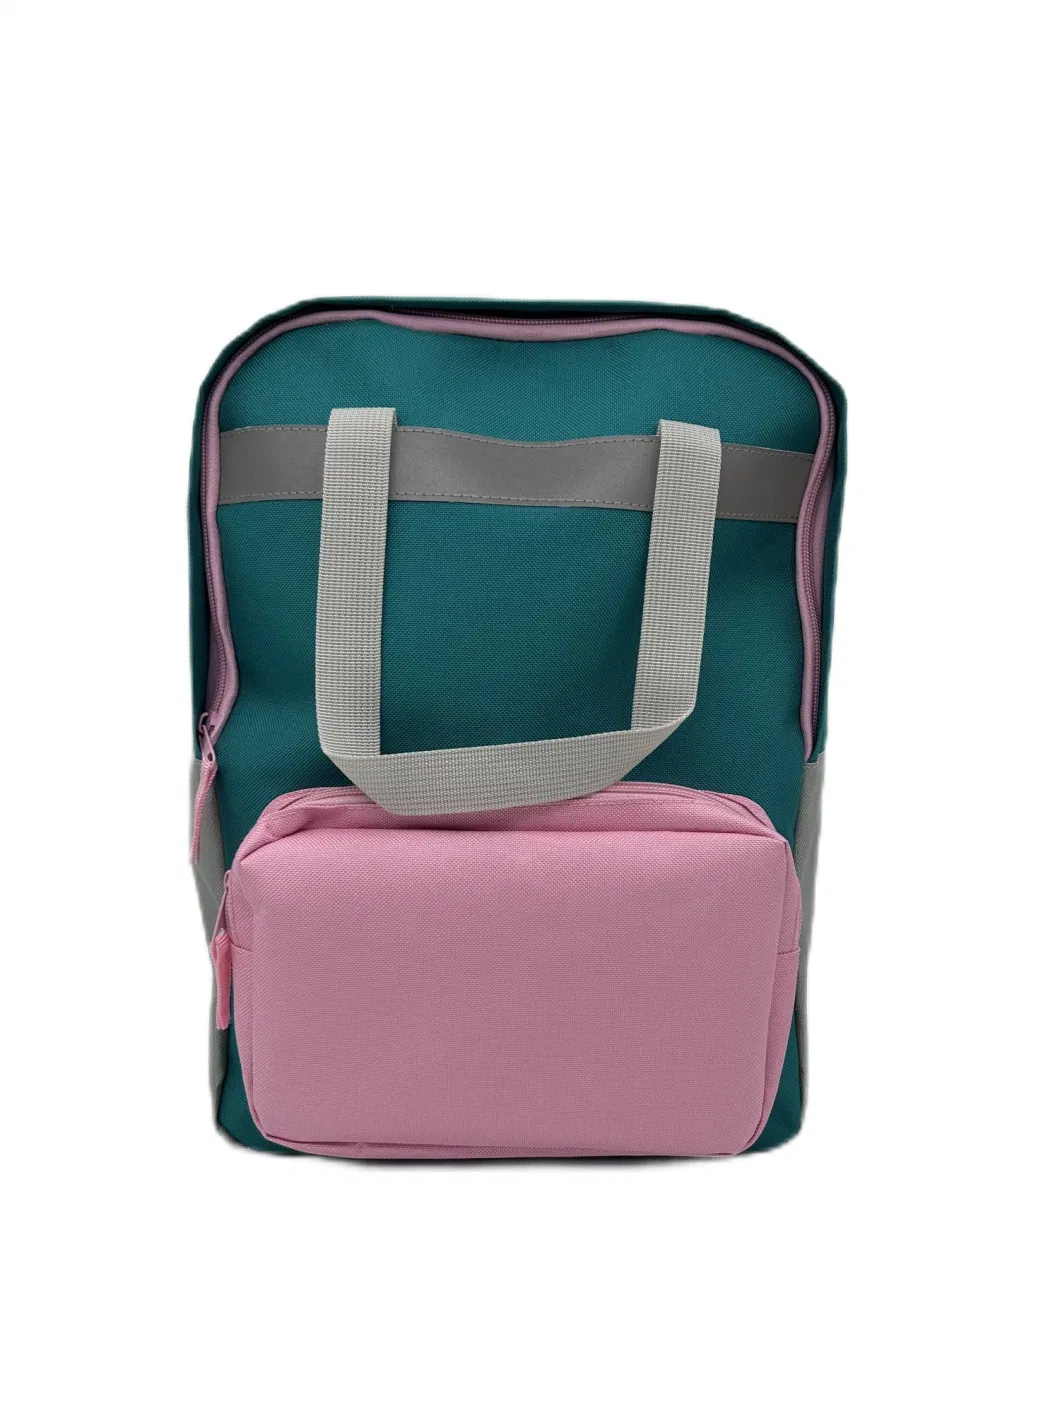 Lovely Cute Children School Bag Candy Macaron Color for Girls Kids